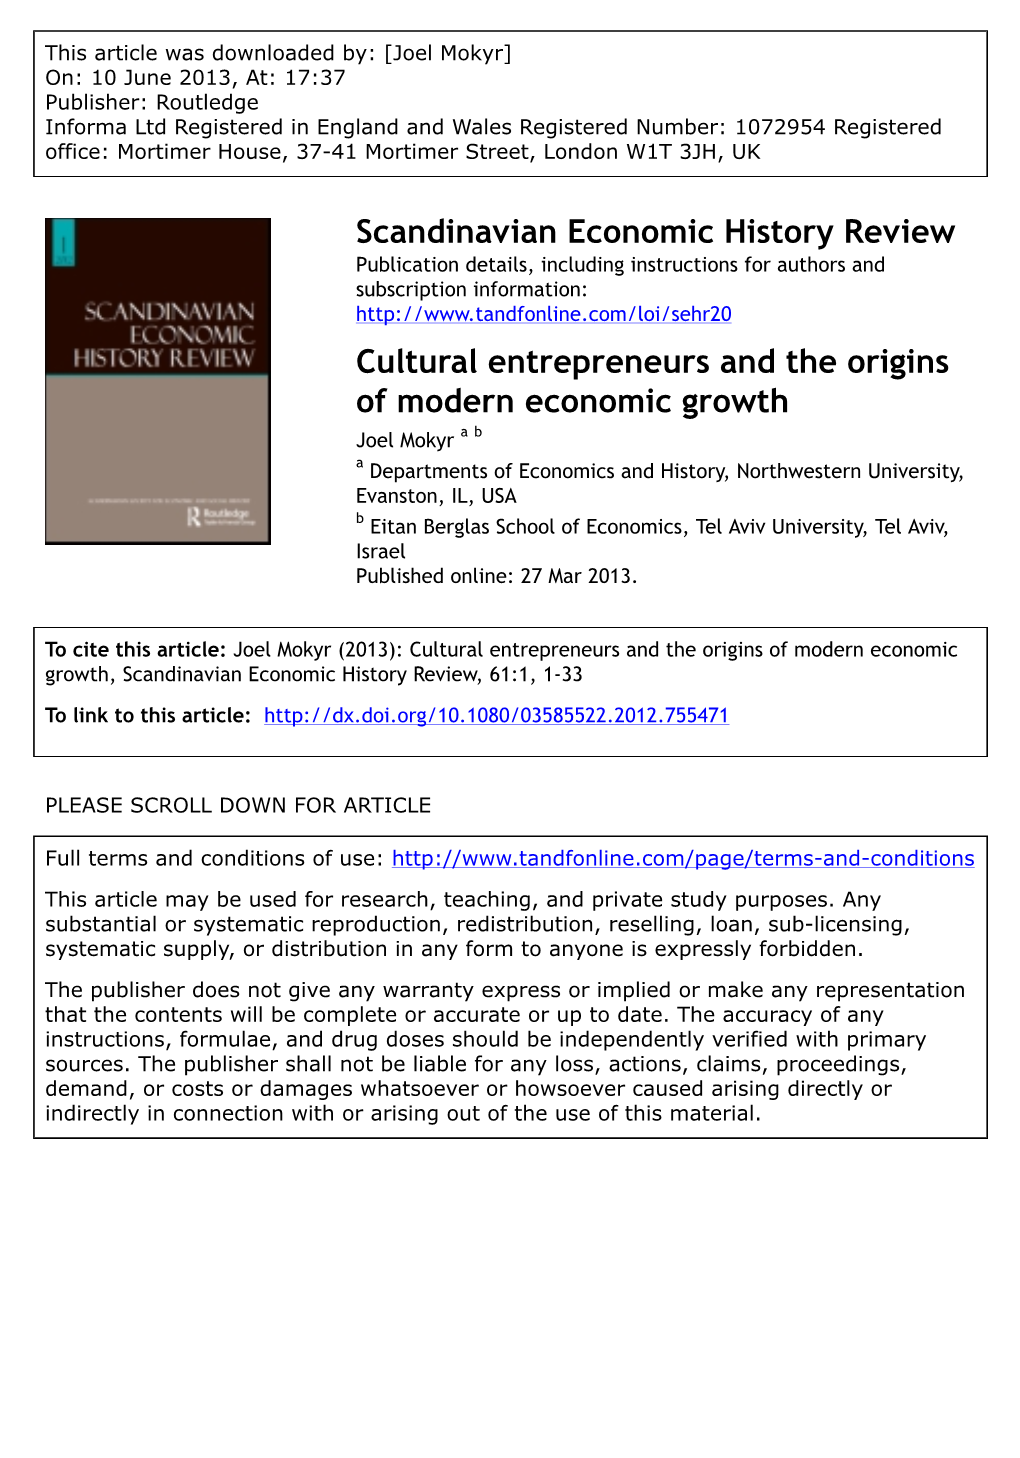 Cultural Entrepreneurs and the Origins of Modern Economic Growth